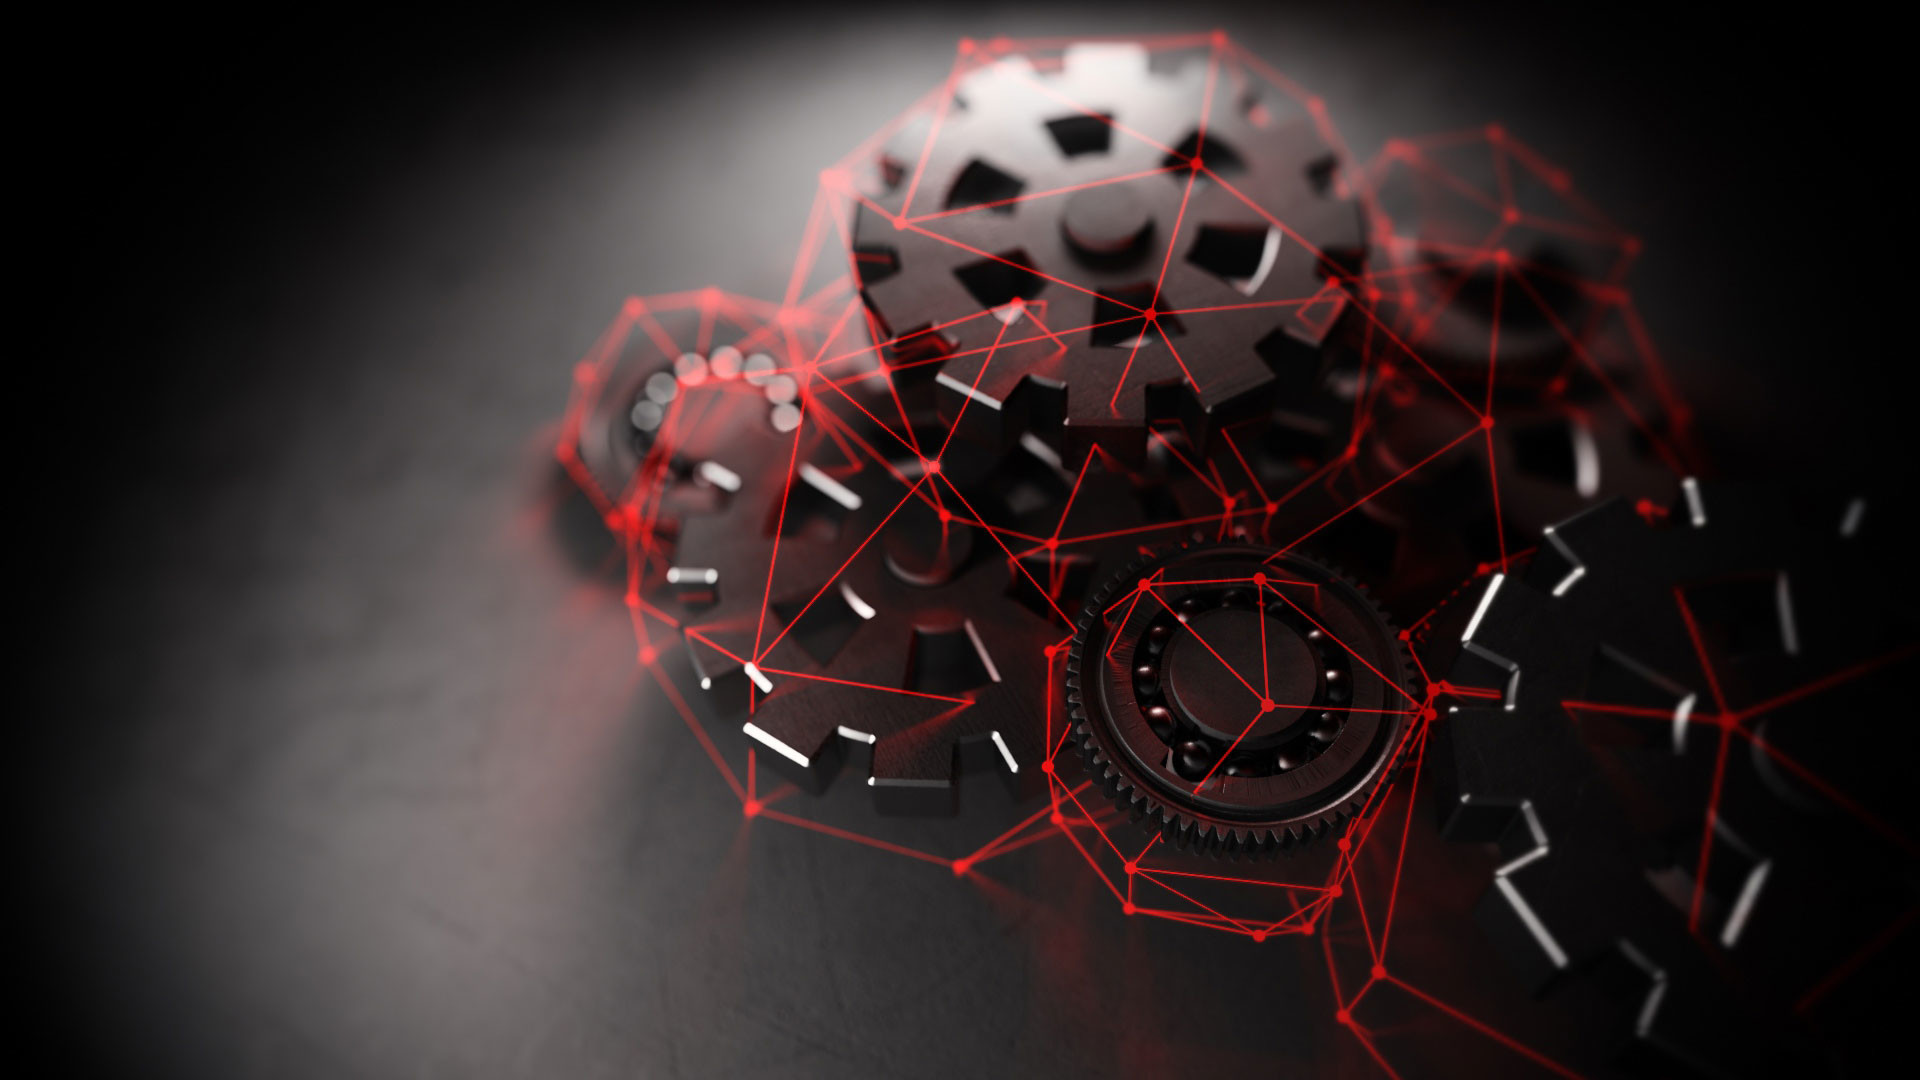 mechanical engineering wallpaper,red,black,games,photography,space